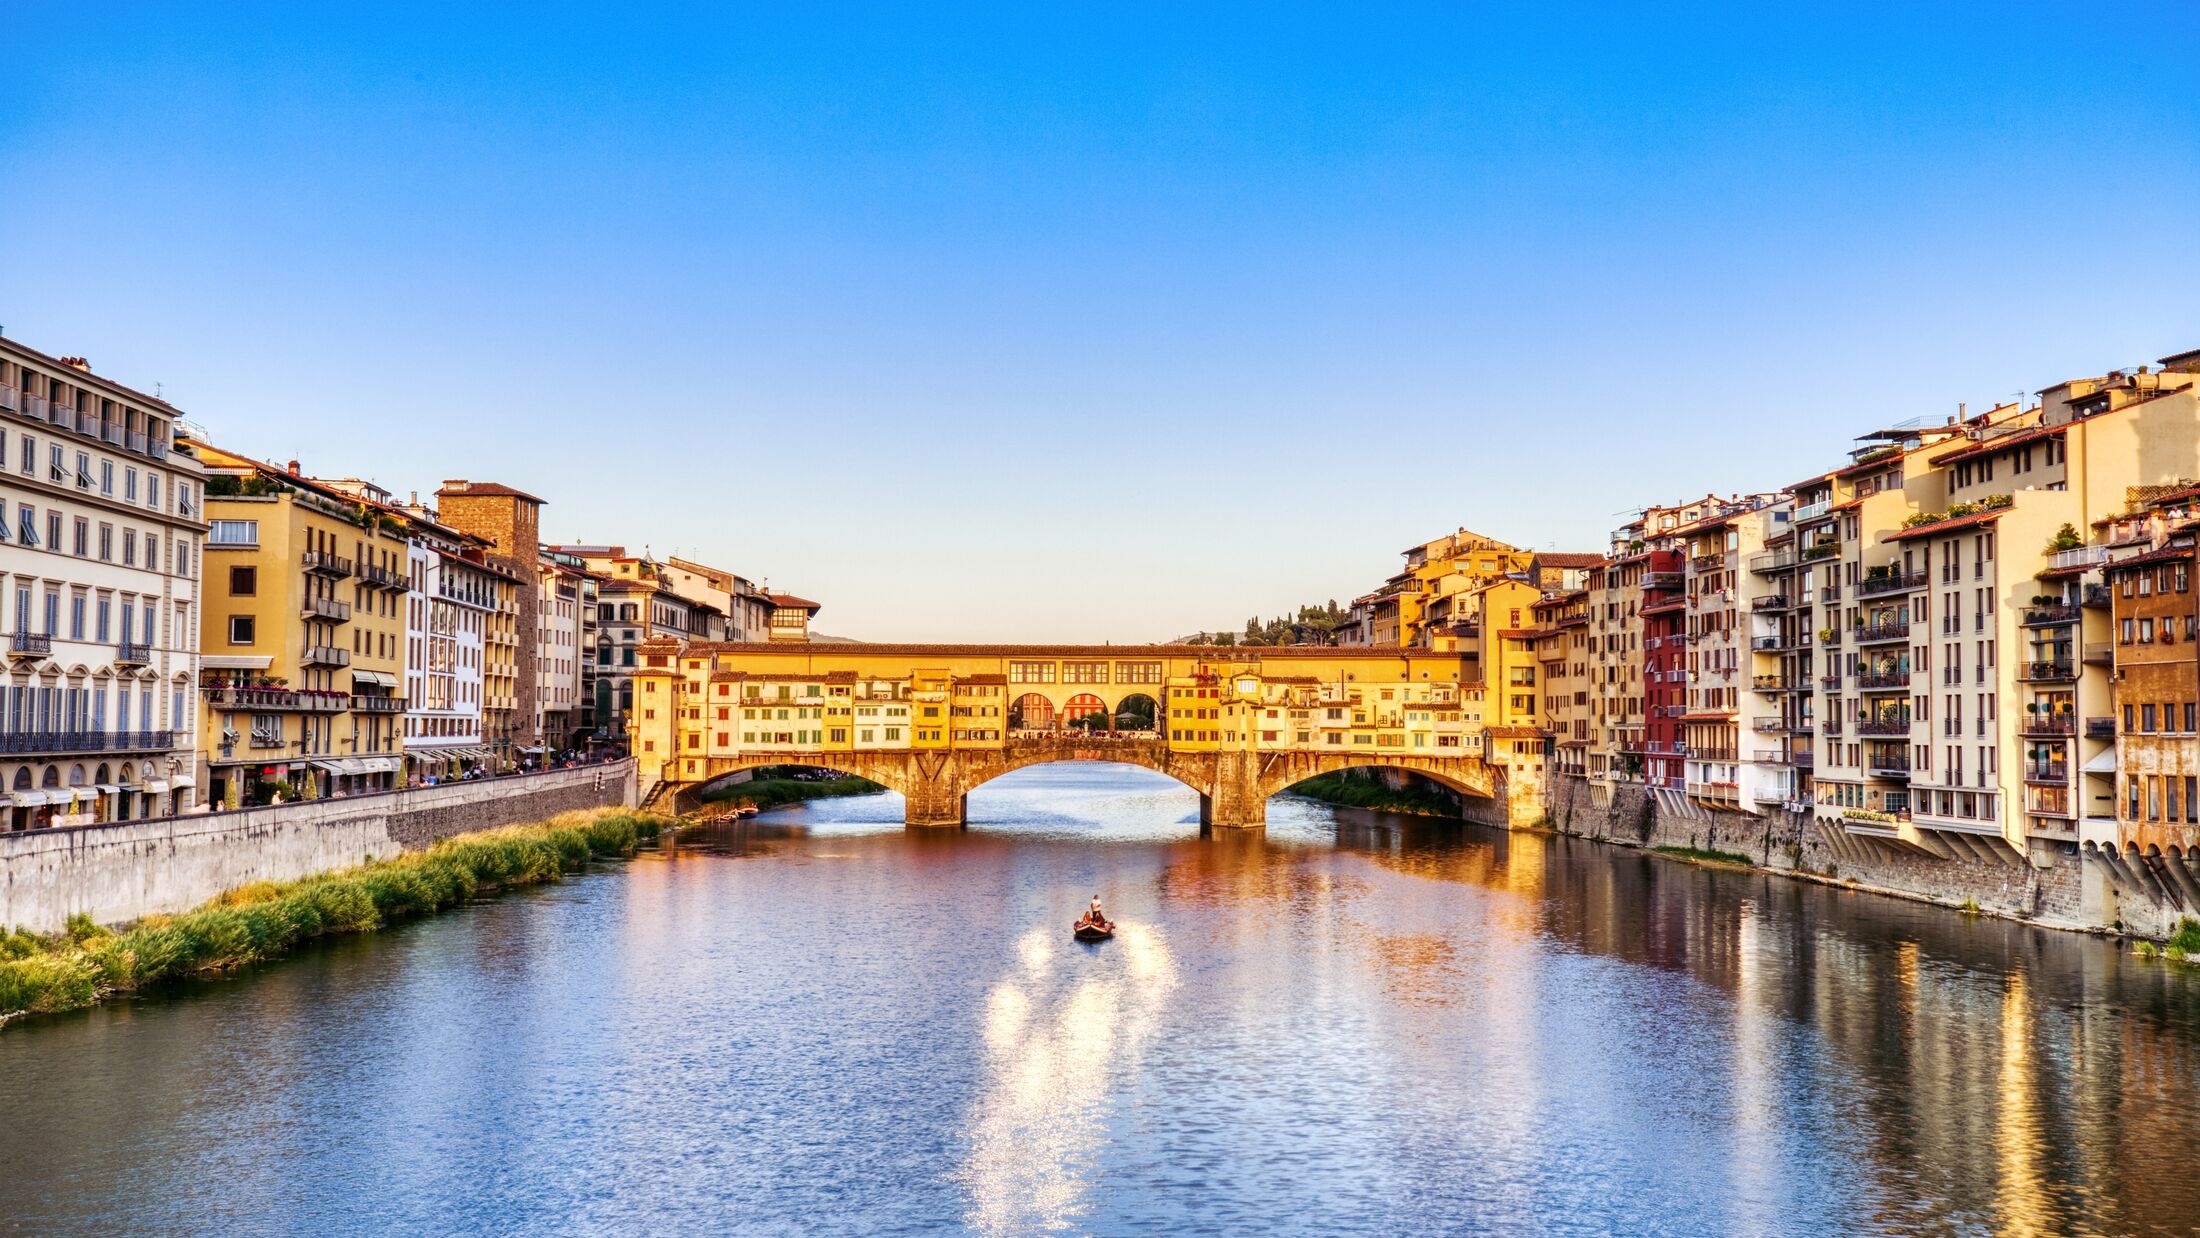 Golden Sunset over Ponte Vecchio Bridge with Traditional Boat on the Arno River, Florence, Italy